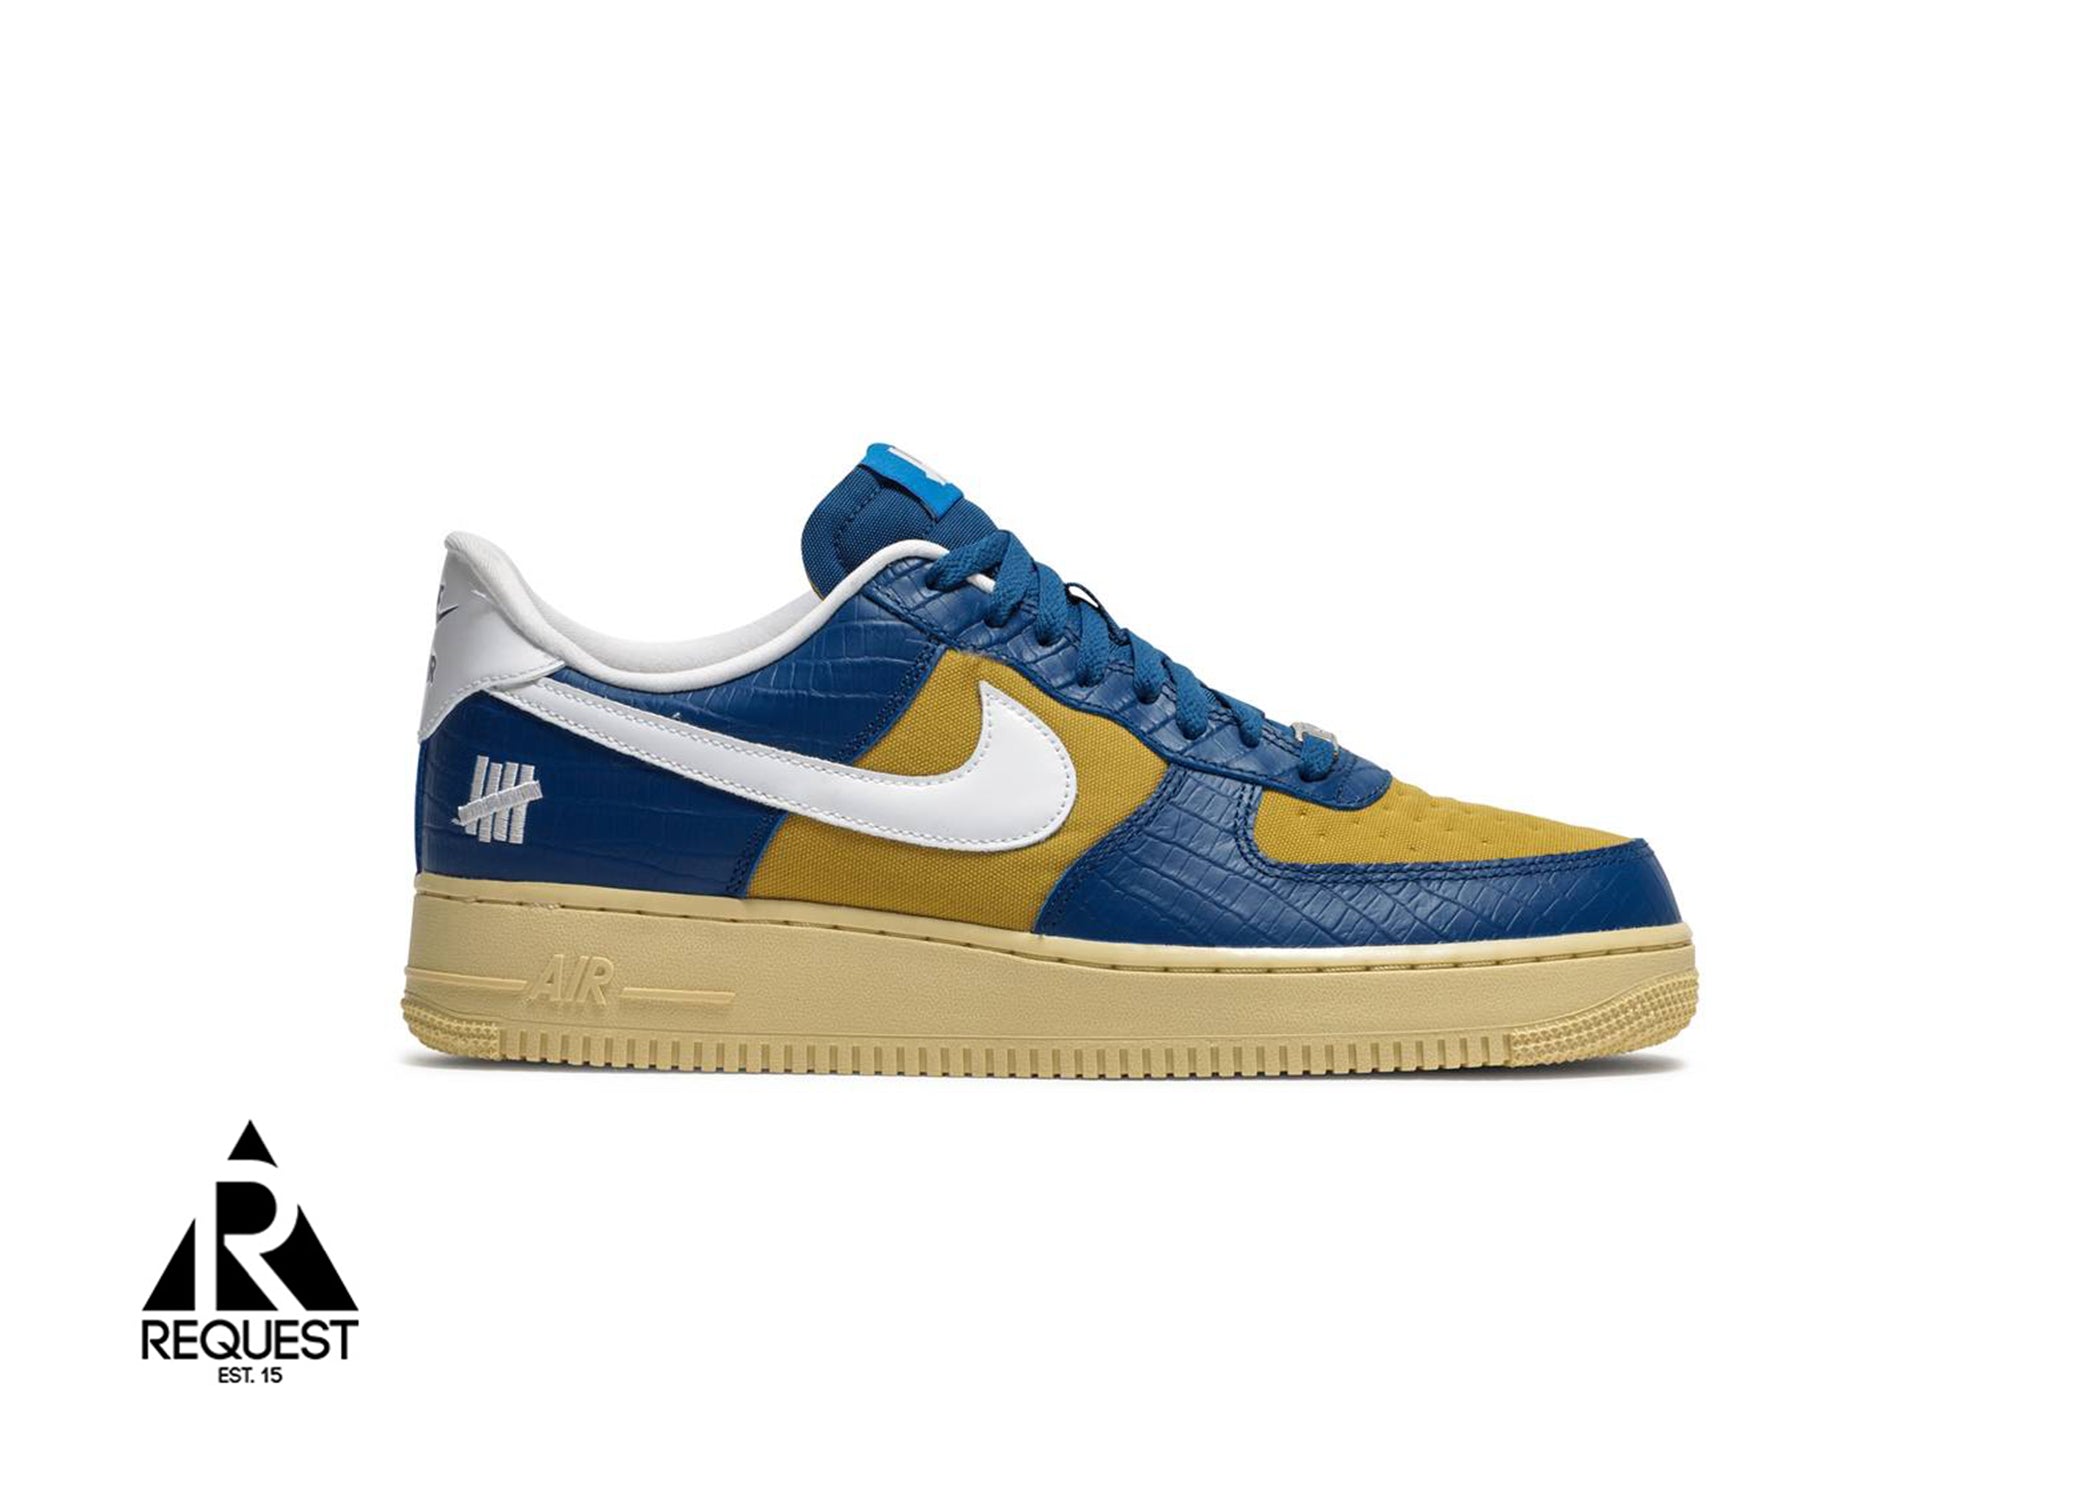 Nike Air Force 1 Low SP “Undefeated 5 On It Blue Yellow Croc”